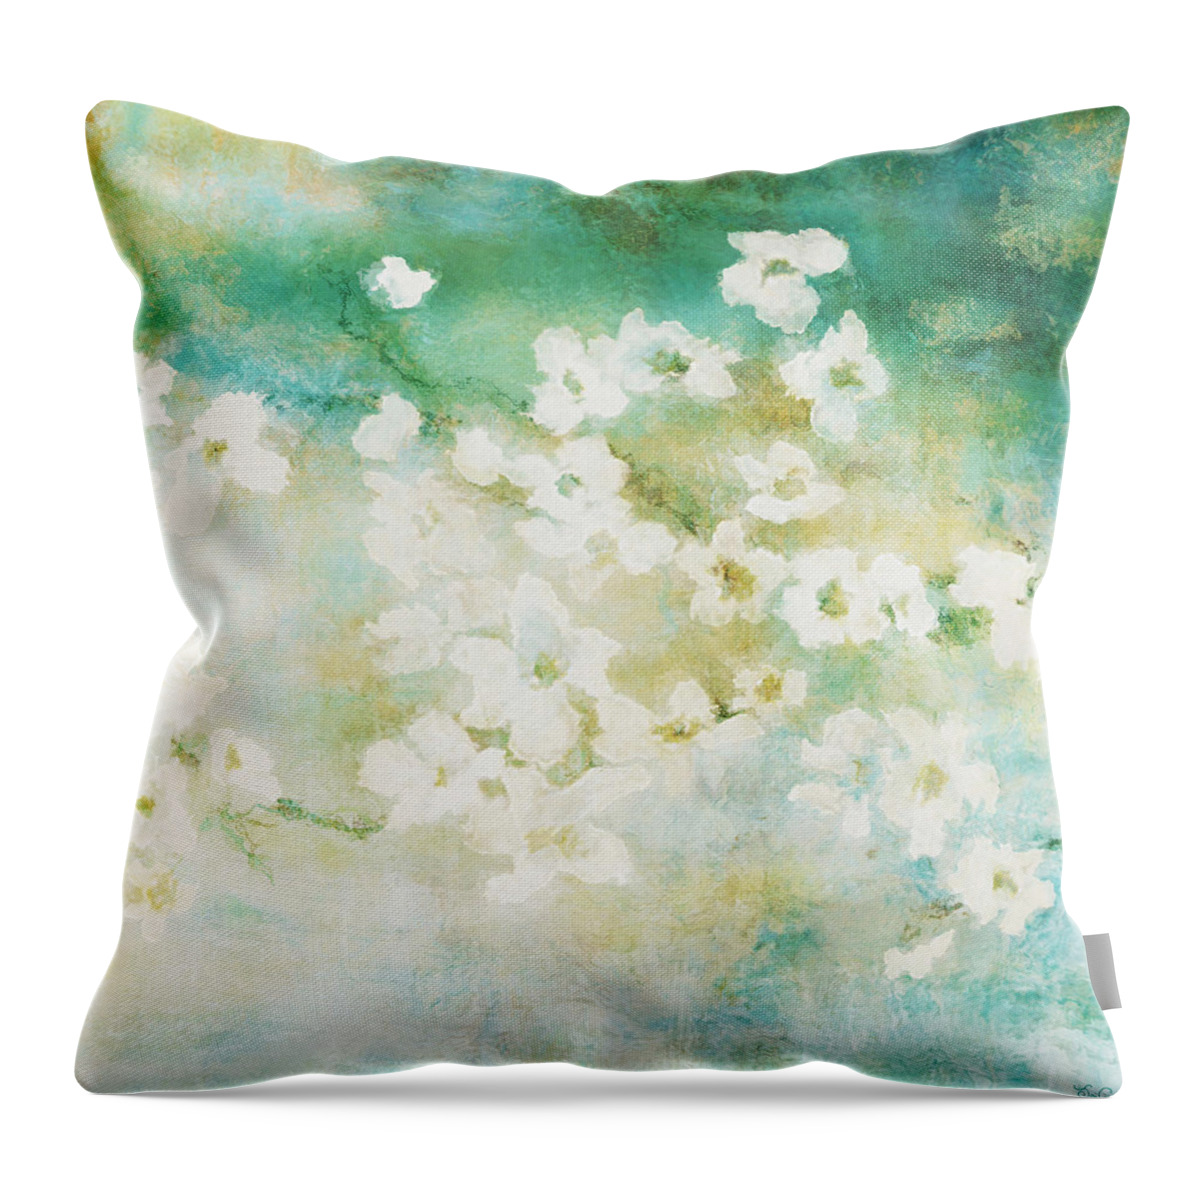 Flower Art Throw Pillow featuring the painting Fragrant Waters - Abstract Art by Jaison Cianelli